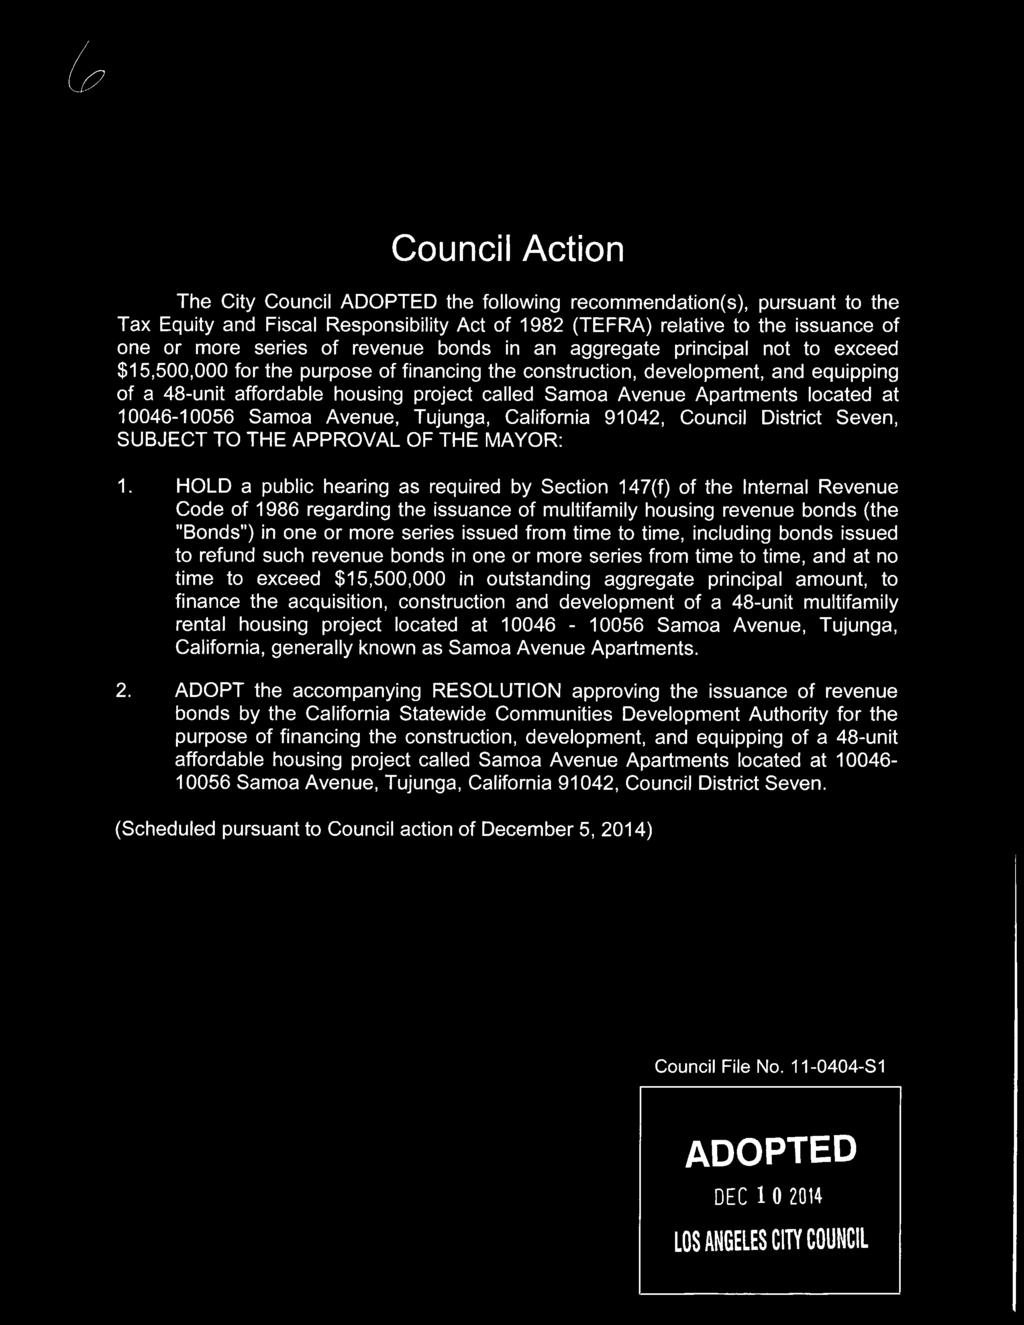 Apartments located at 10046-10056 Samoa Avenue, Tujunga, California 91042, Council District Seven, SUBJECT TO THE APPROVAL OF THE MAYOR: 1. HOLD a public hearing as required by Section 14?